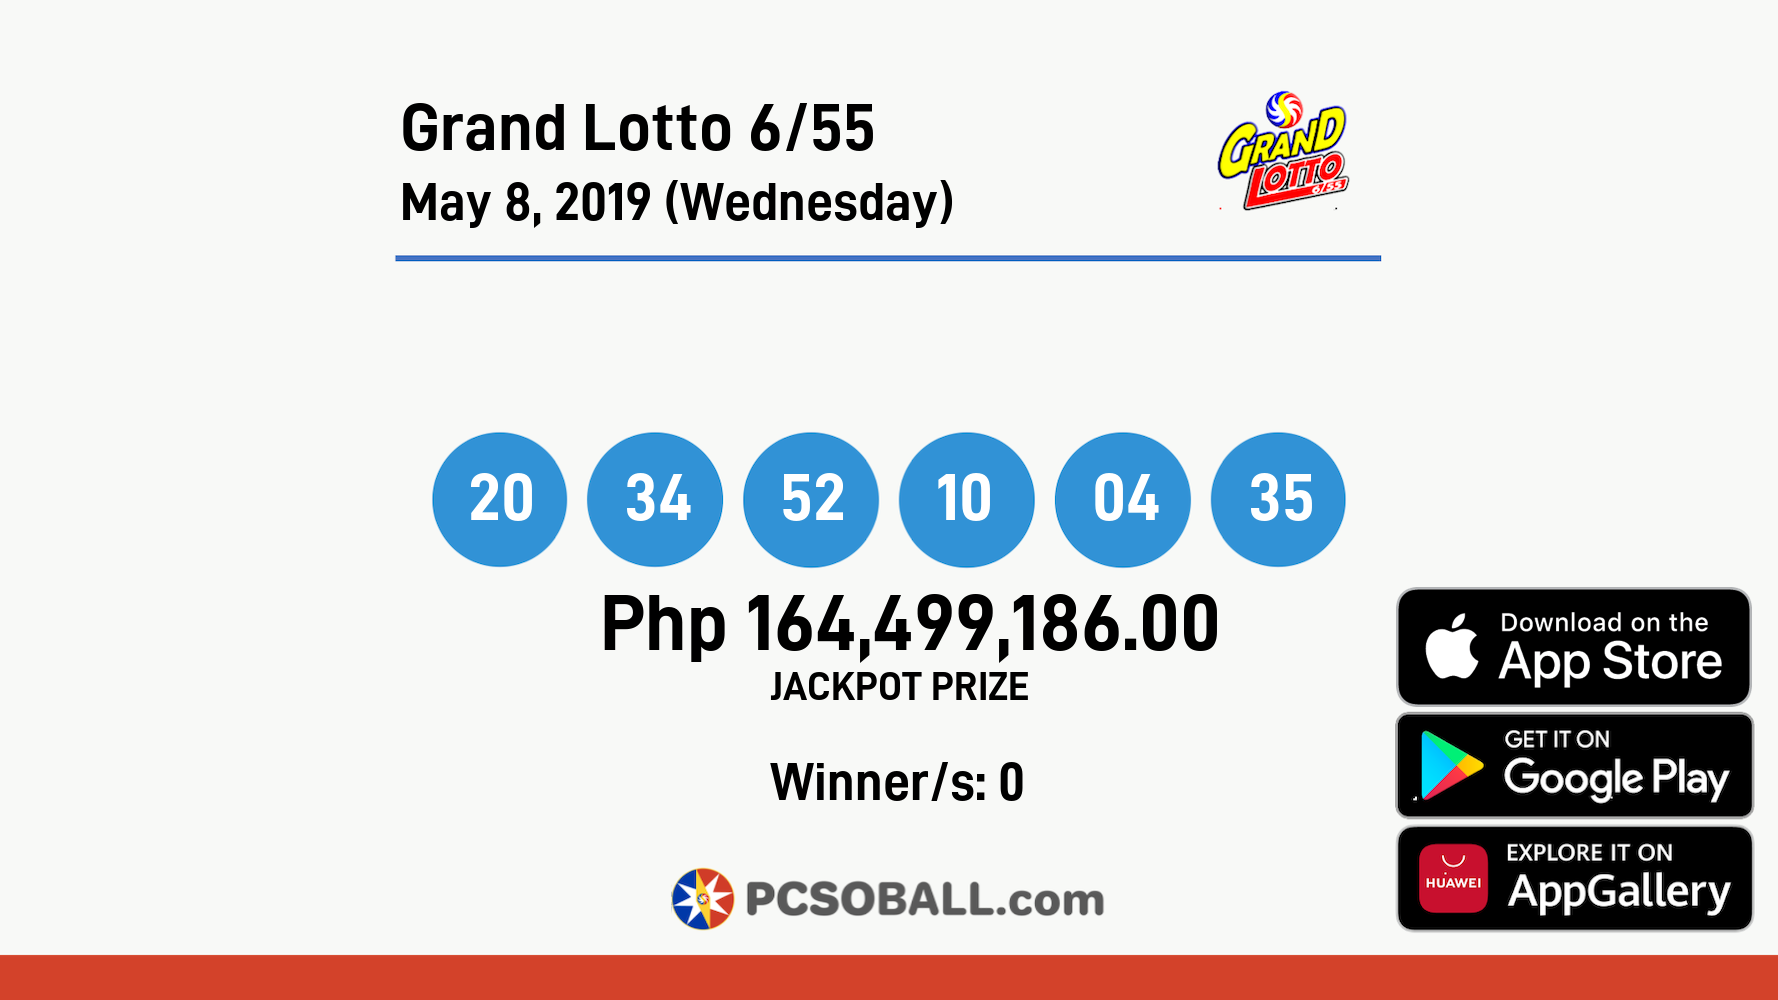 Grand Lotto 6/55 May 8, 2019 (Wednesday) Result